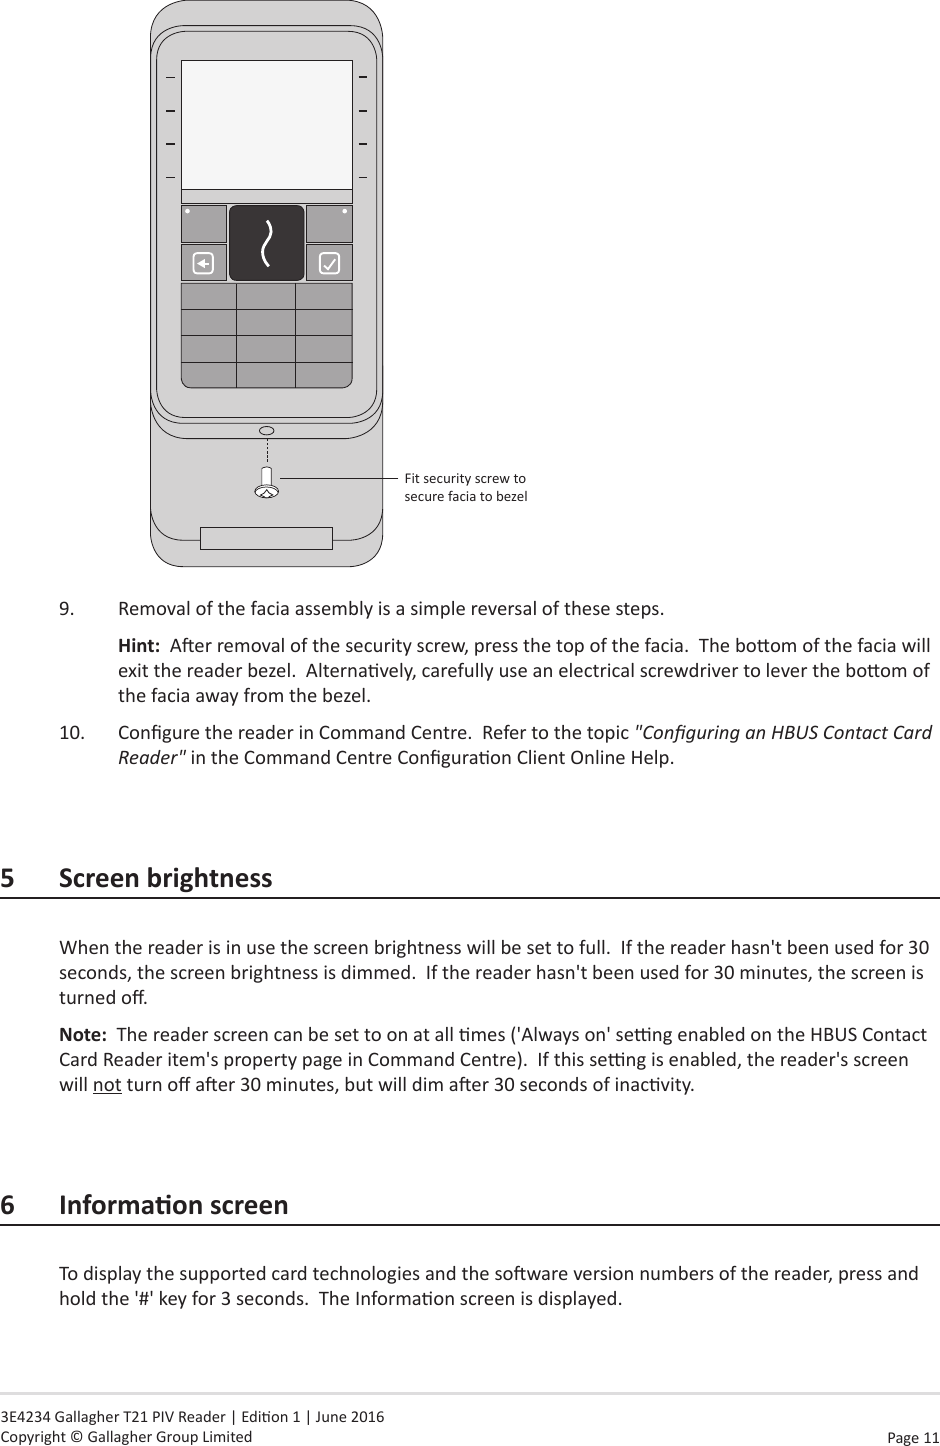 Page  11   3E4234 Gallagher T21 PIV Reader | Edion 1 | June 2016 Copyright © Gallagher Group Limited Fit security screw to secure facia to bezel9.  Removal of the facia assembly is a simple reversal of these steps.Hint:  Aer removal of the security screw, press the top of the facia.  The boom of the facia will exit the reader bezel.  Alternavely, carefully use an electrical screwdriver to lever the boom of the facia away from the bezel.10.  Congure the reader in Command Centre.  Refer to the topic &quot;Conguring an HBUS Contact Card Reader&quot; in the Command Centre Conguraon Client Online Help.5  Screen brightnessWhen the reader is in use the screen brightness will be set to full.  If the reader hasn&apos;t been used for 30 seconds, the screen brightness is dimmed.  If the reader hasn&apos;t been used for 30 minutes, the screen is turned o.Note:  The reader screen can be set to on at all mes (&apos;Always on&apos; seng enabled on the HBUS Contact Card Reader item&apos;s property page in Command Centre).  If this seng is enabled, the reader&apos;s screen will not turn o aer 30 minutes, but will dim aer 30 seconds of inacvity.6 InformaonscreenTo display the supported card technologies and the soware version numbers of the reader, press and hold the &apos;#&apos; key for 3 seconds.  The Informaon screen is displayed.